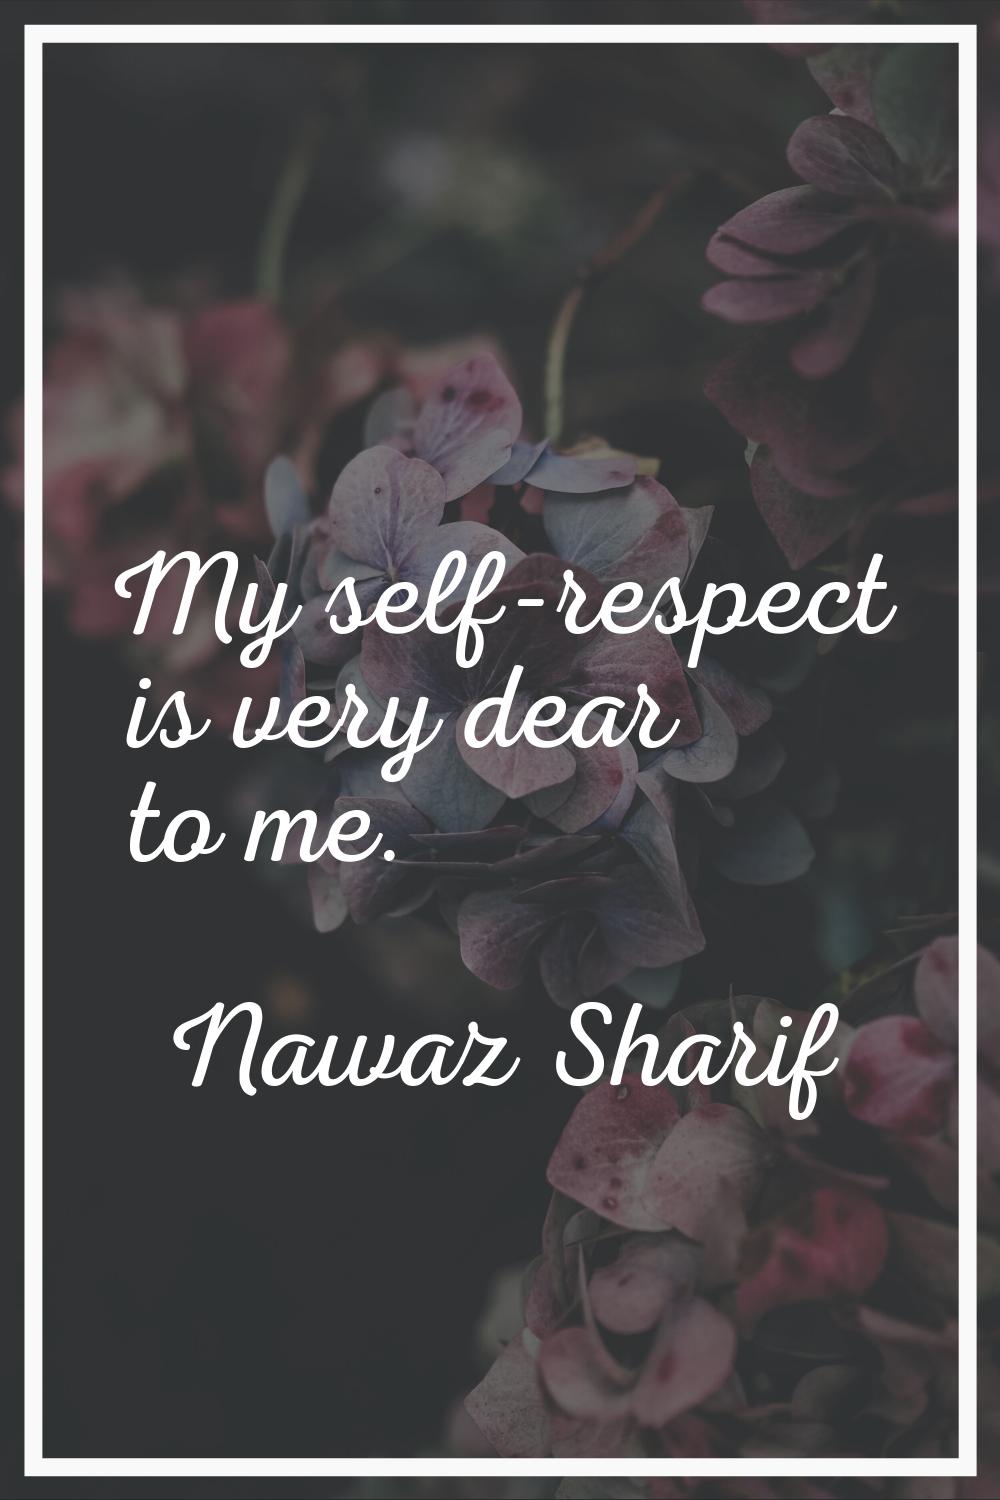 My self-respect is very dear to me.